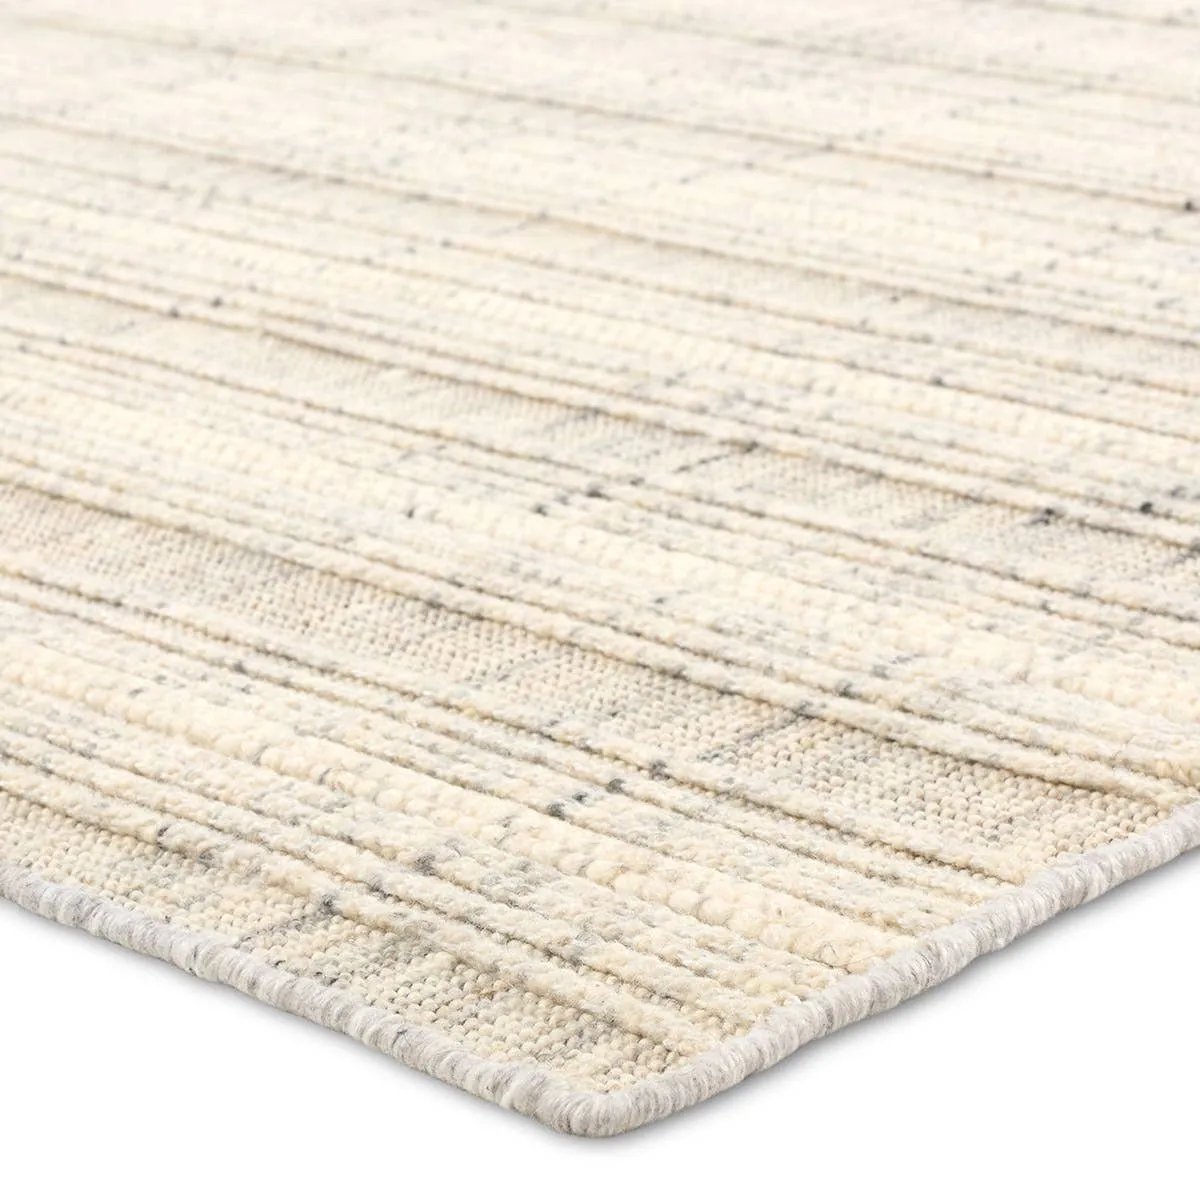 Handwoven in India, the Park City Promontory by Barclay Butera evokes a masculine modernity through neutral-toned grids. The modern Promontory rug showcases a grid in on-trend hues of cream and gray. The cut and looped pile adds texture while maintaining a soft hand. Amethyst Home provides interior design, new home construction design consulting, vintage area rugs, and lighting in the Dallas metro area.